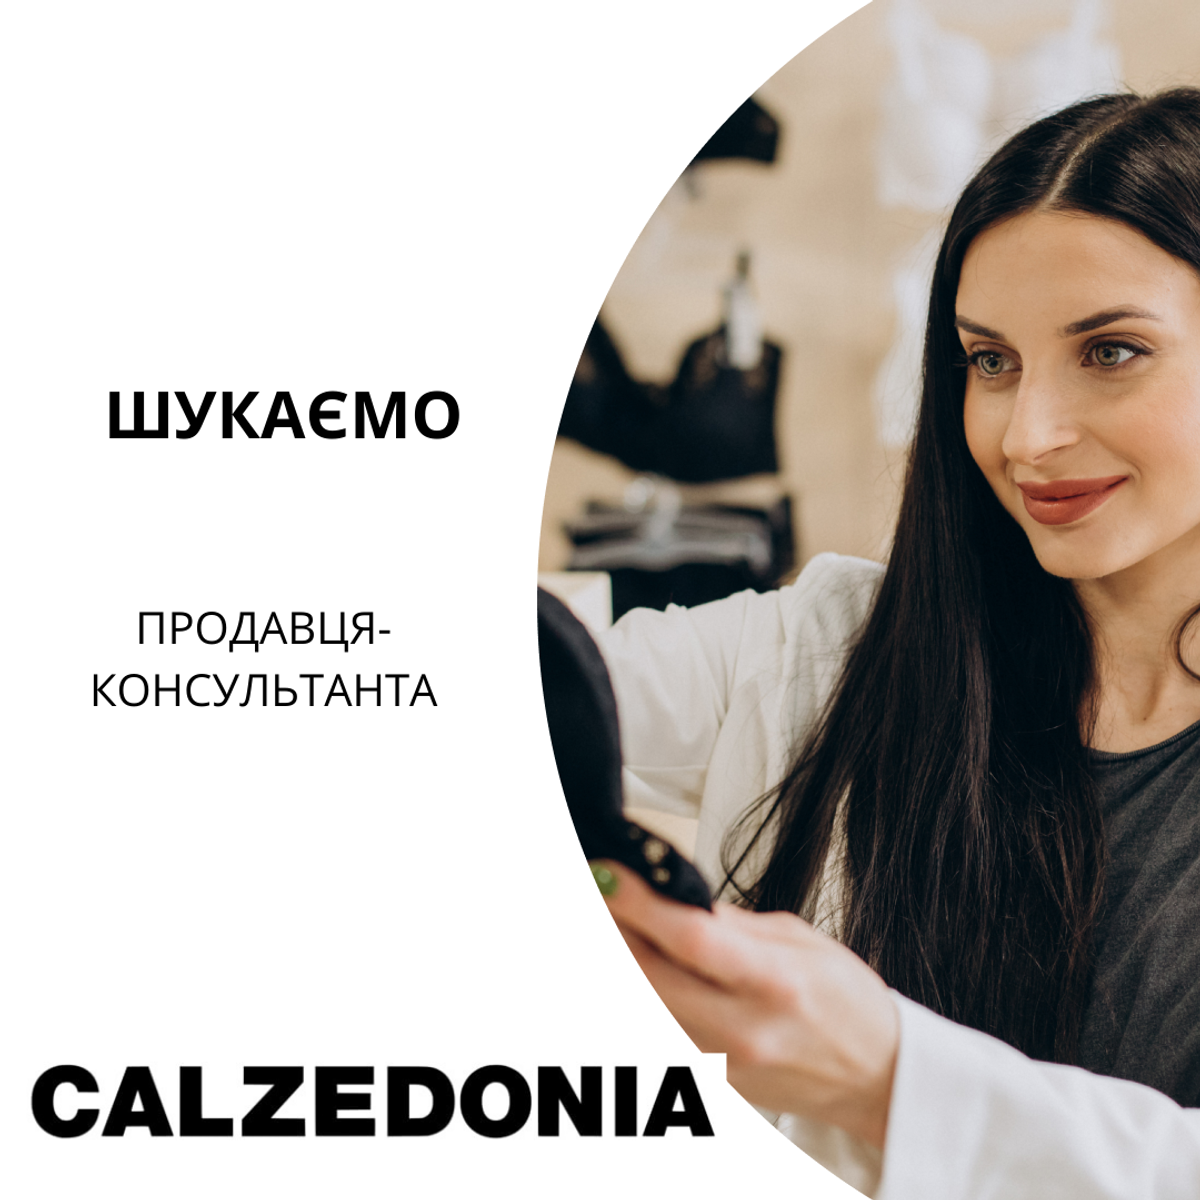 Vacancy at the CALZEDONIA store